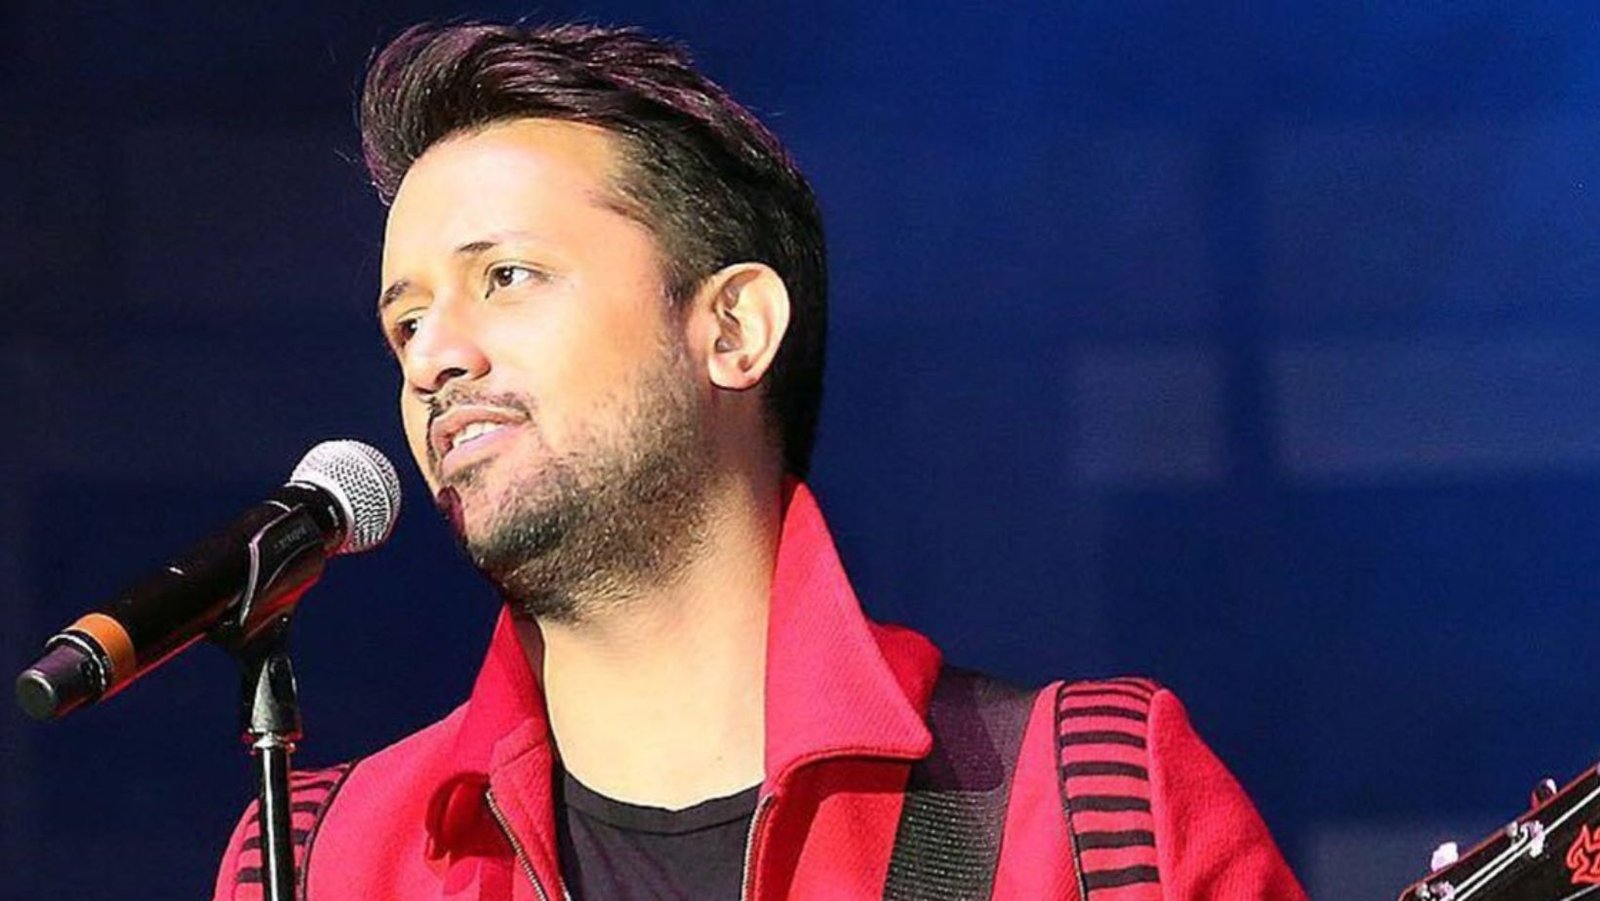 Atif Aslam returns to India with super hit song